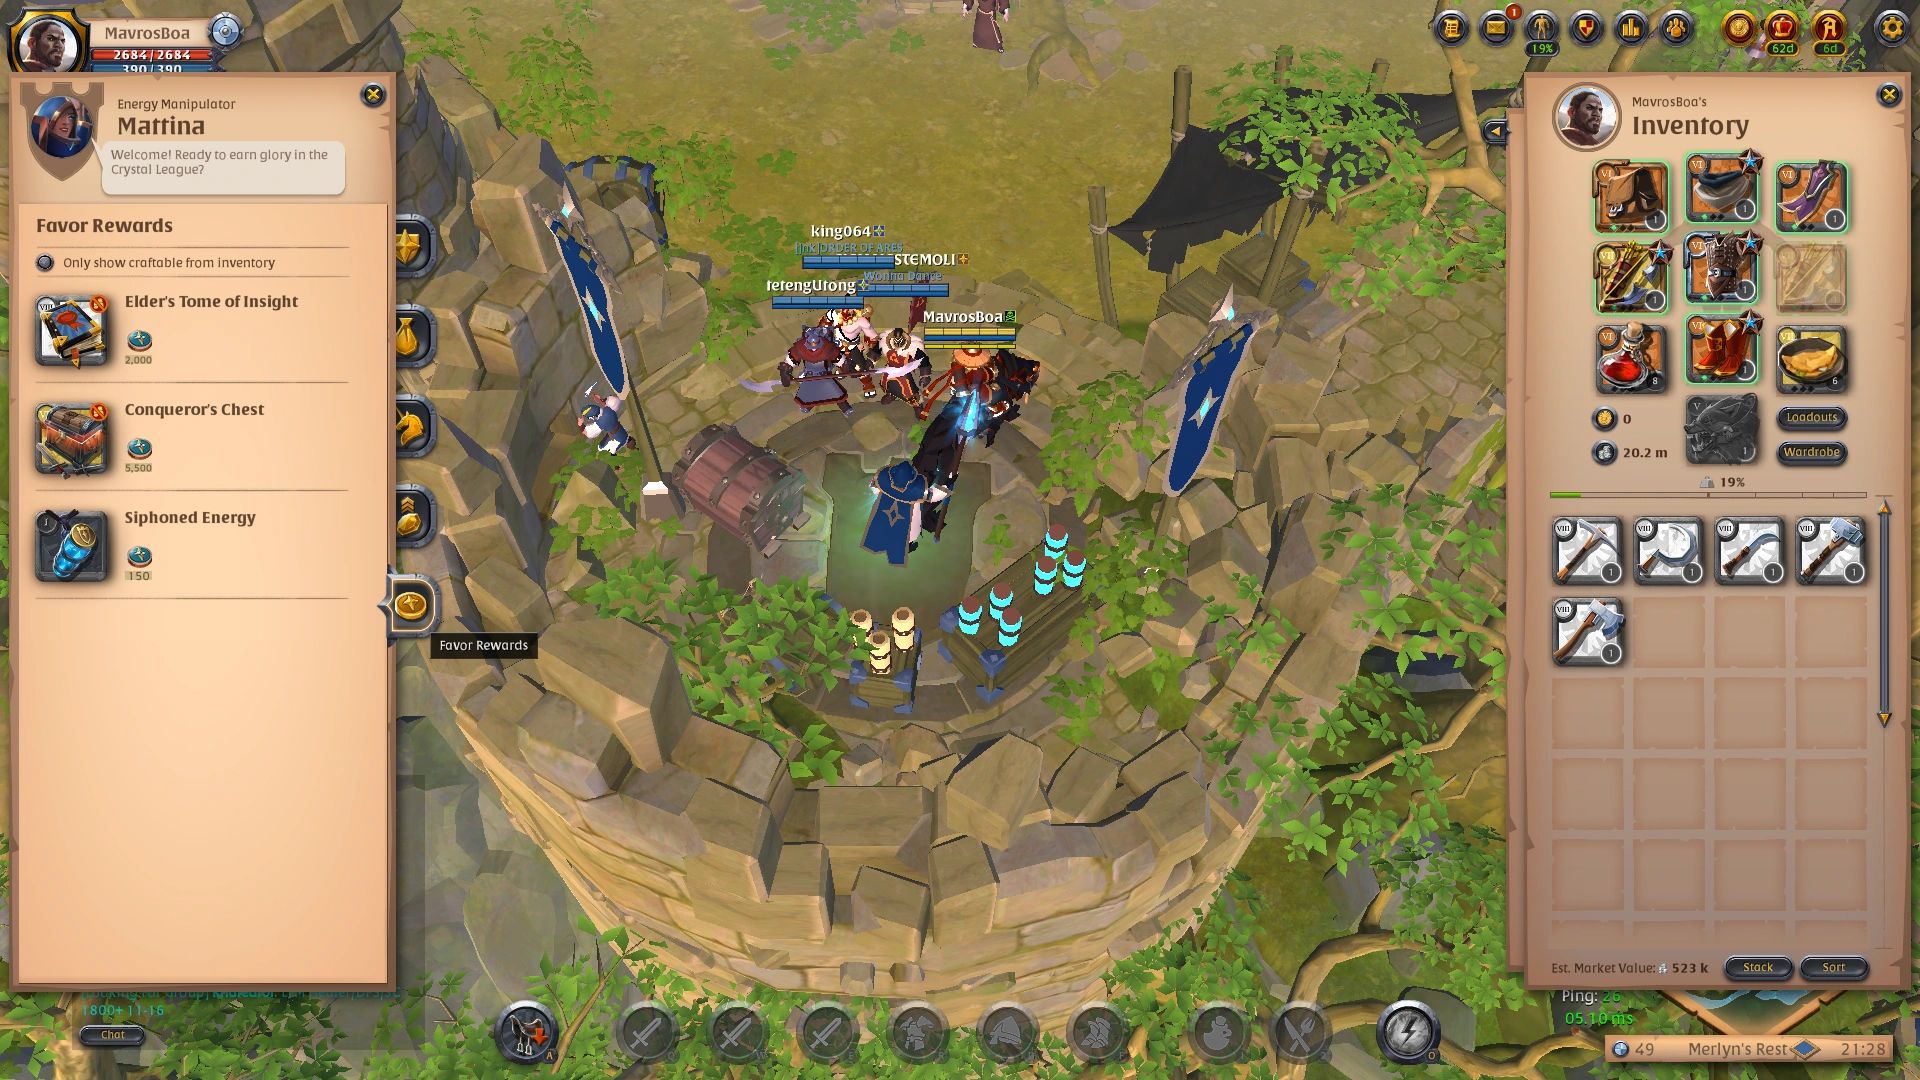 The Challenges of Cross Platform Support with Albion Online - Game Wisdom